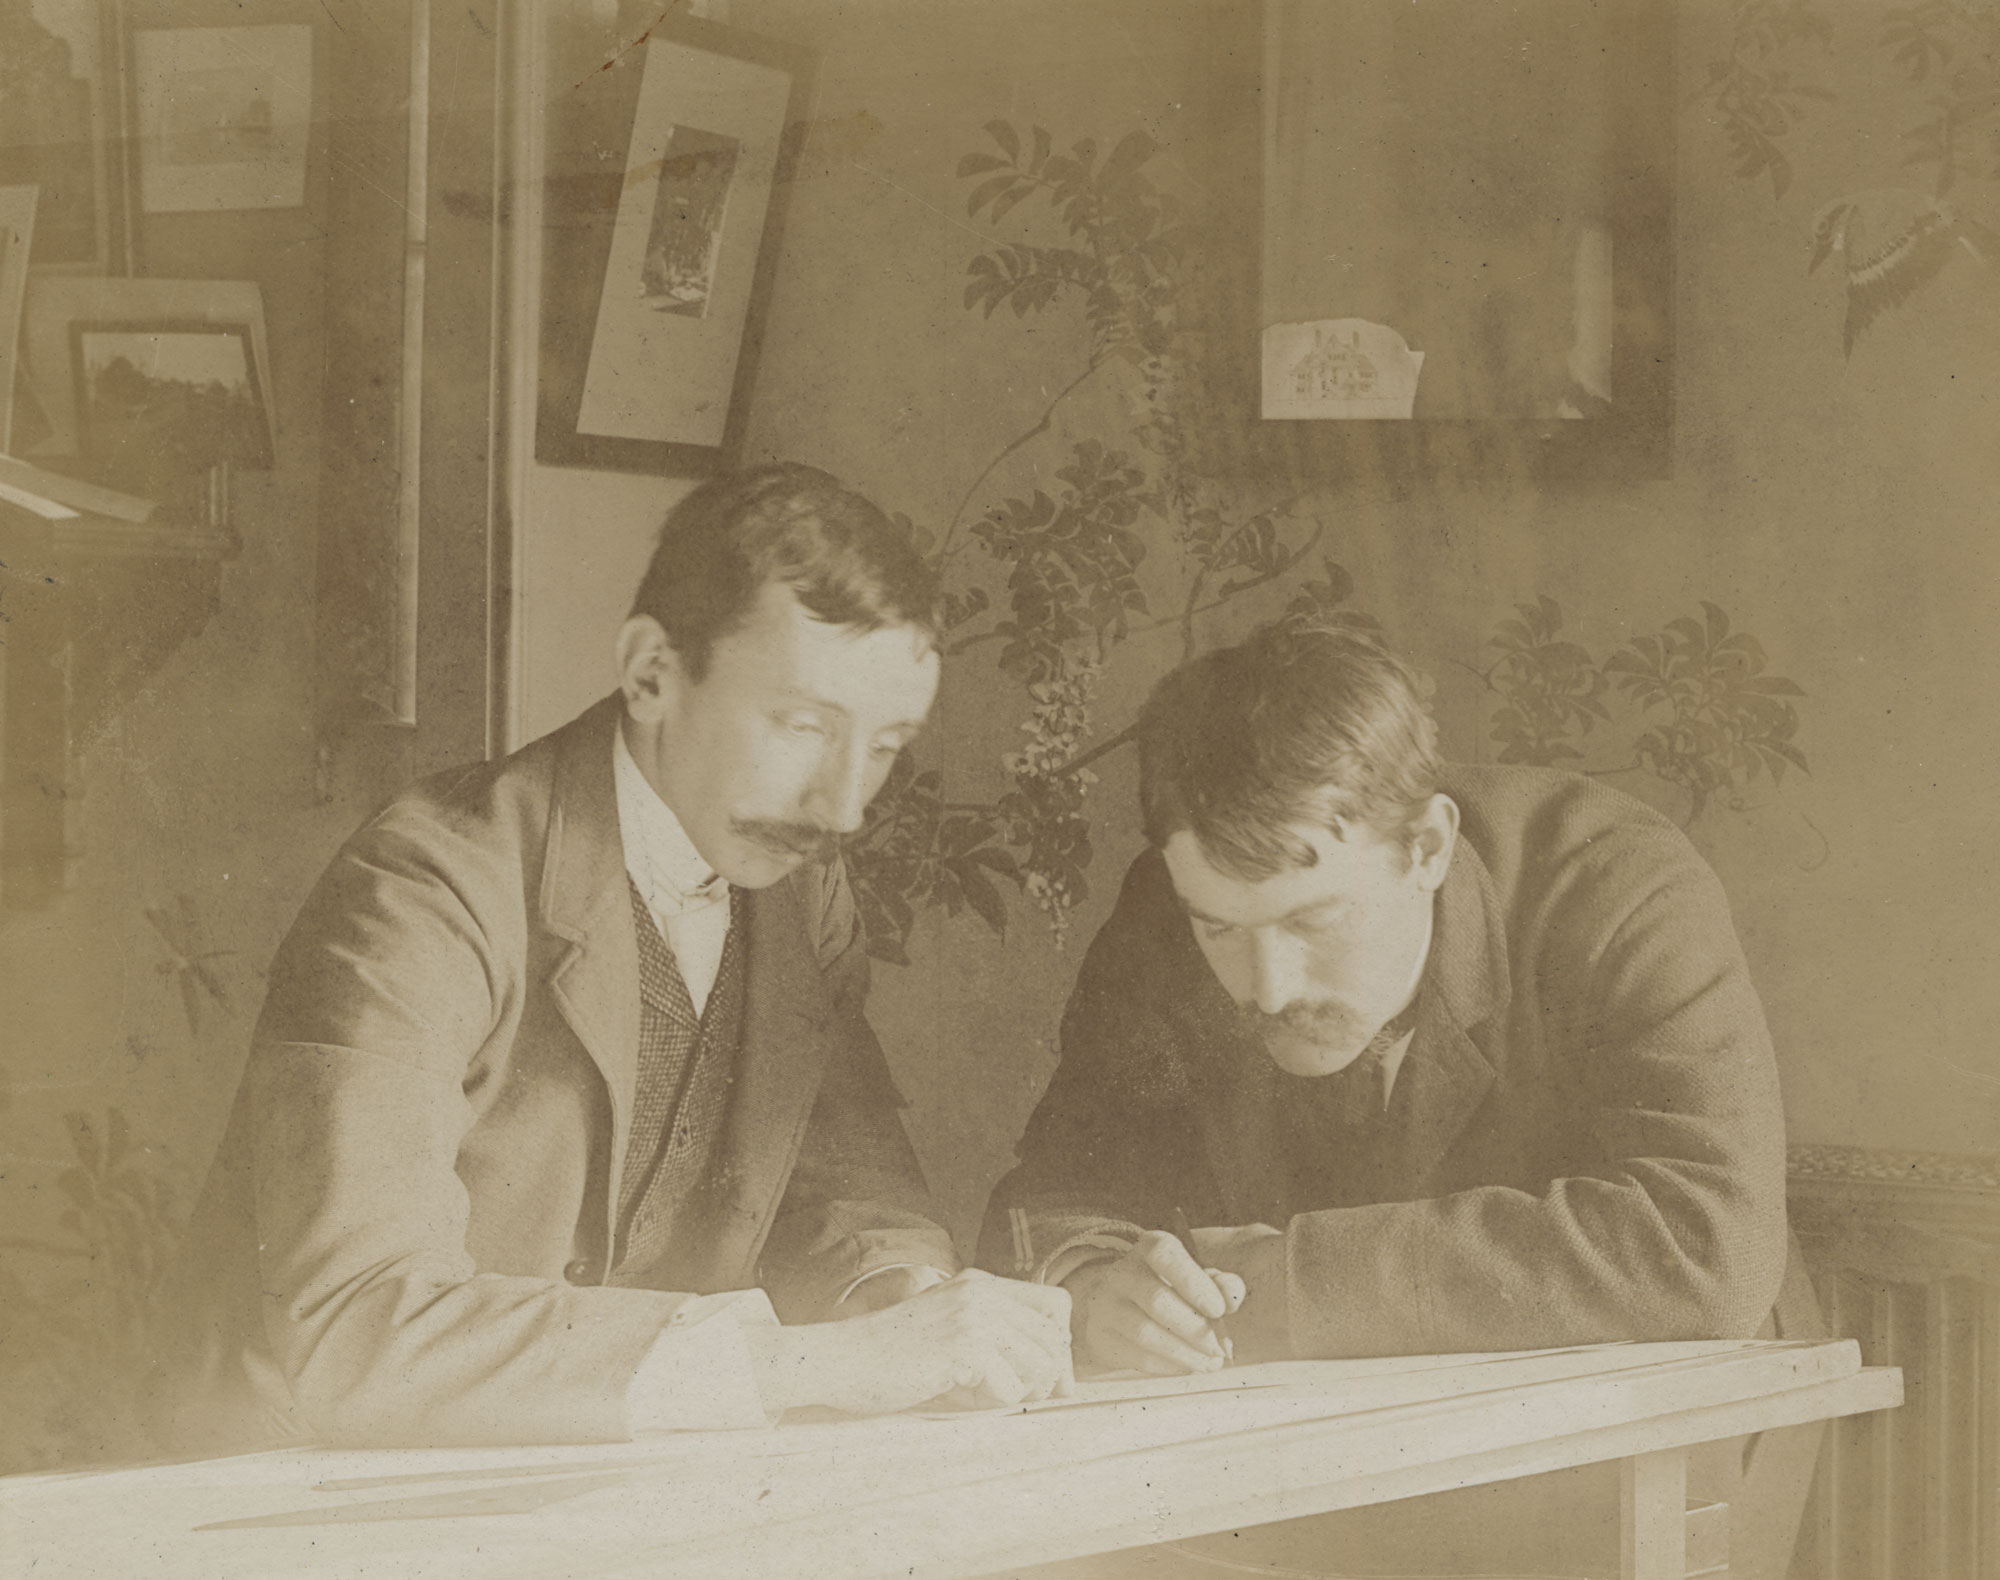 Sepia colored potrait of two male architects looking at architectural drawing